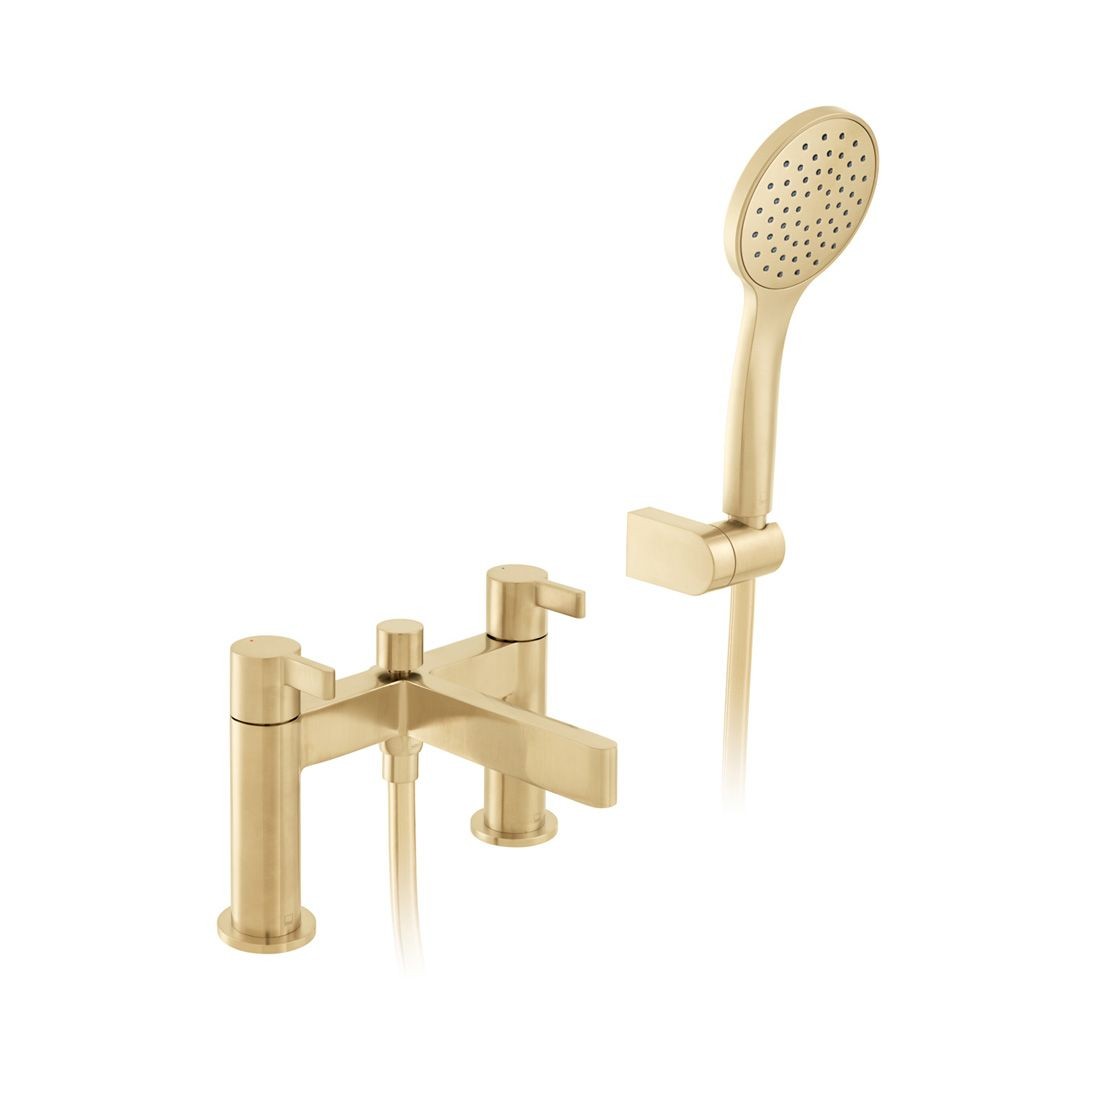 Individual by Vado Edit Deck Mounted Bath Mixer Tap with Shower Kit Brushed Gold [IND-EDI130+K-BRG]